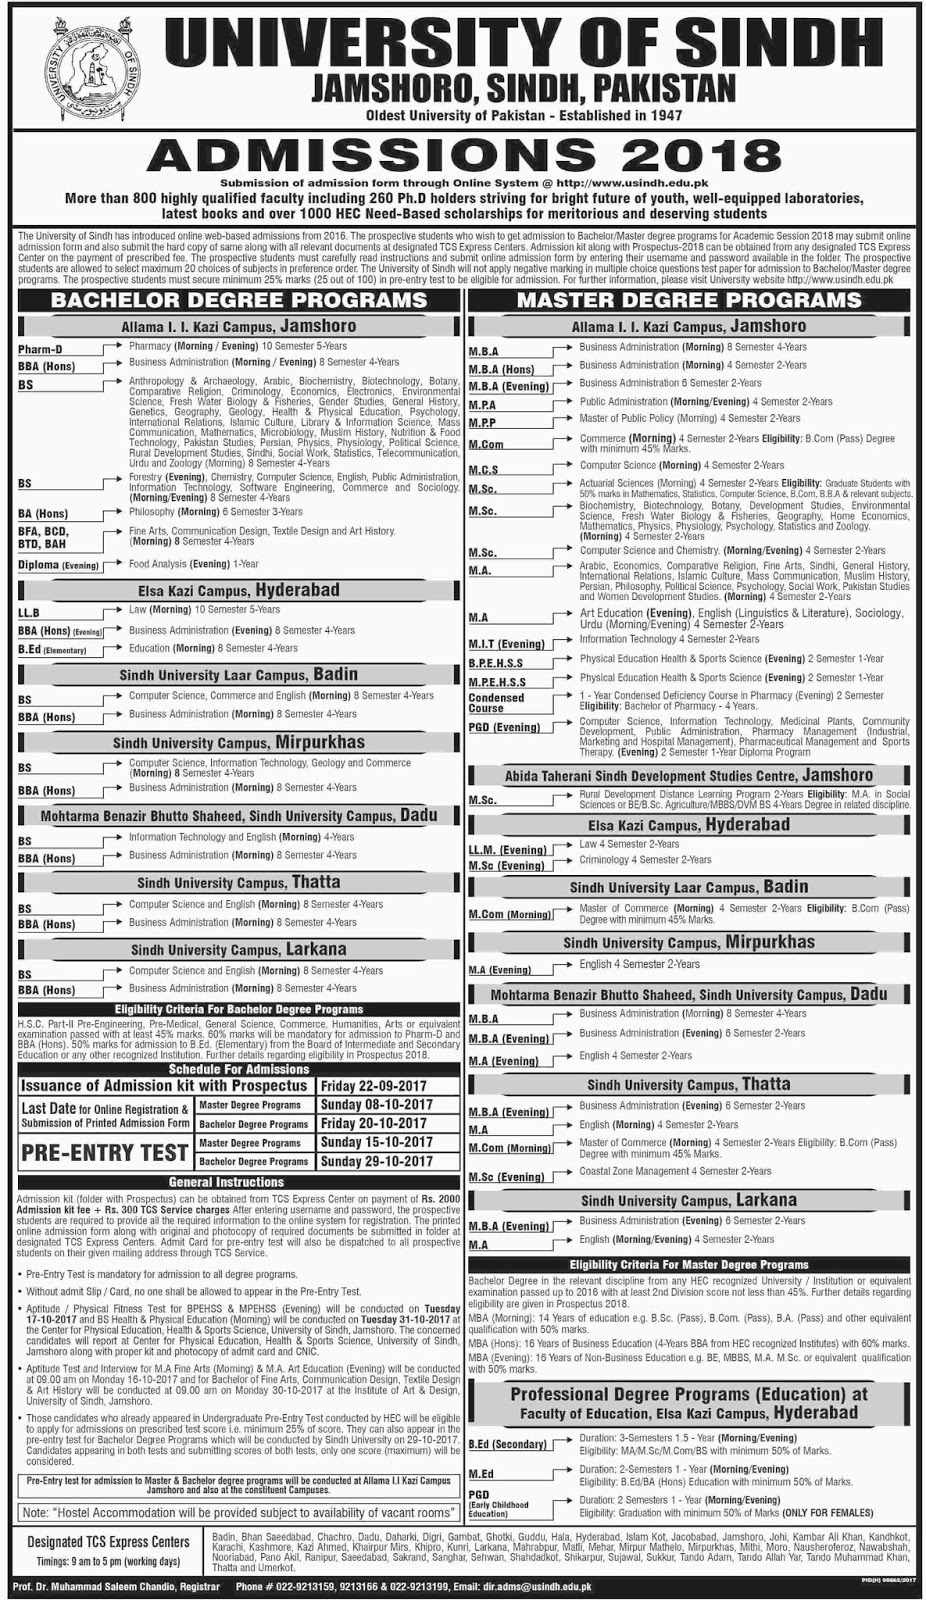 Admissions Open in University of Sindh, Jamshoro - 2017